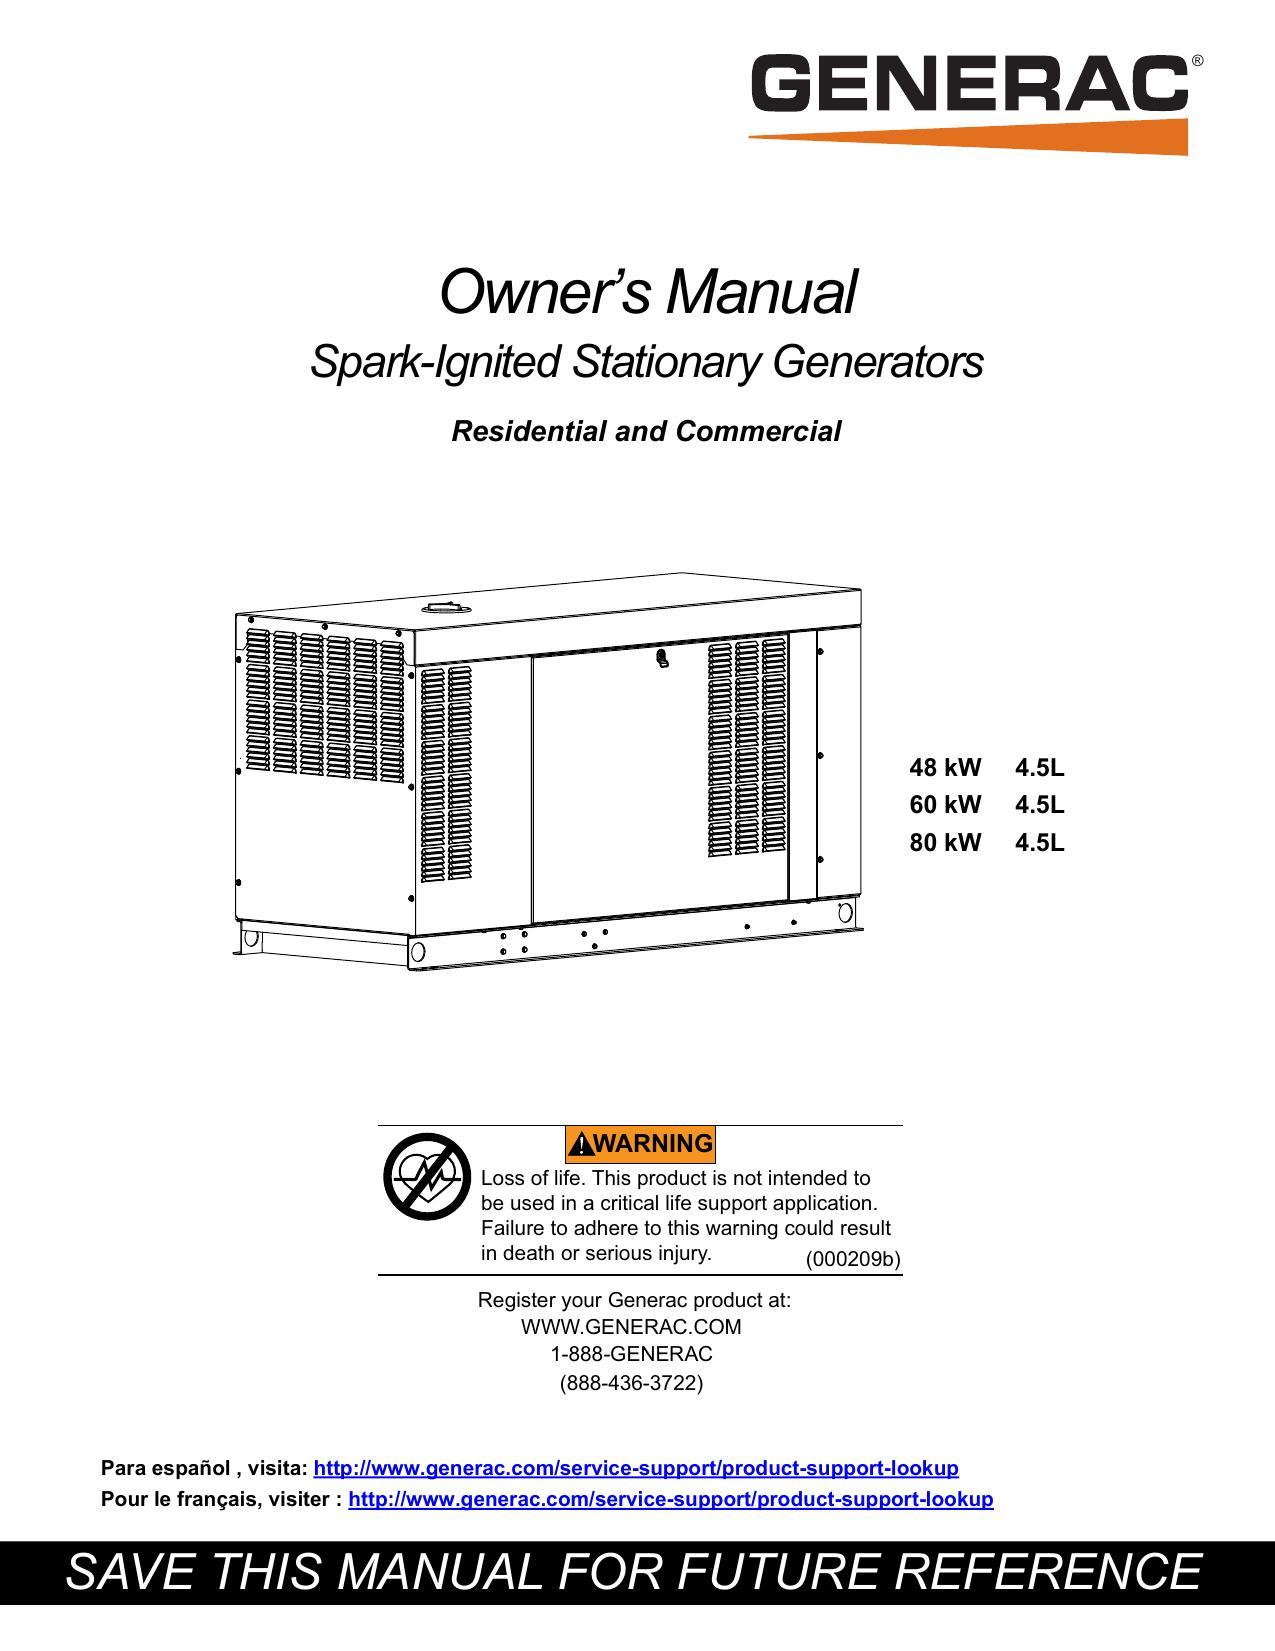 owners-manual-for-spark-ignited-stationary-generators-residential-and-commercial.pdf